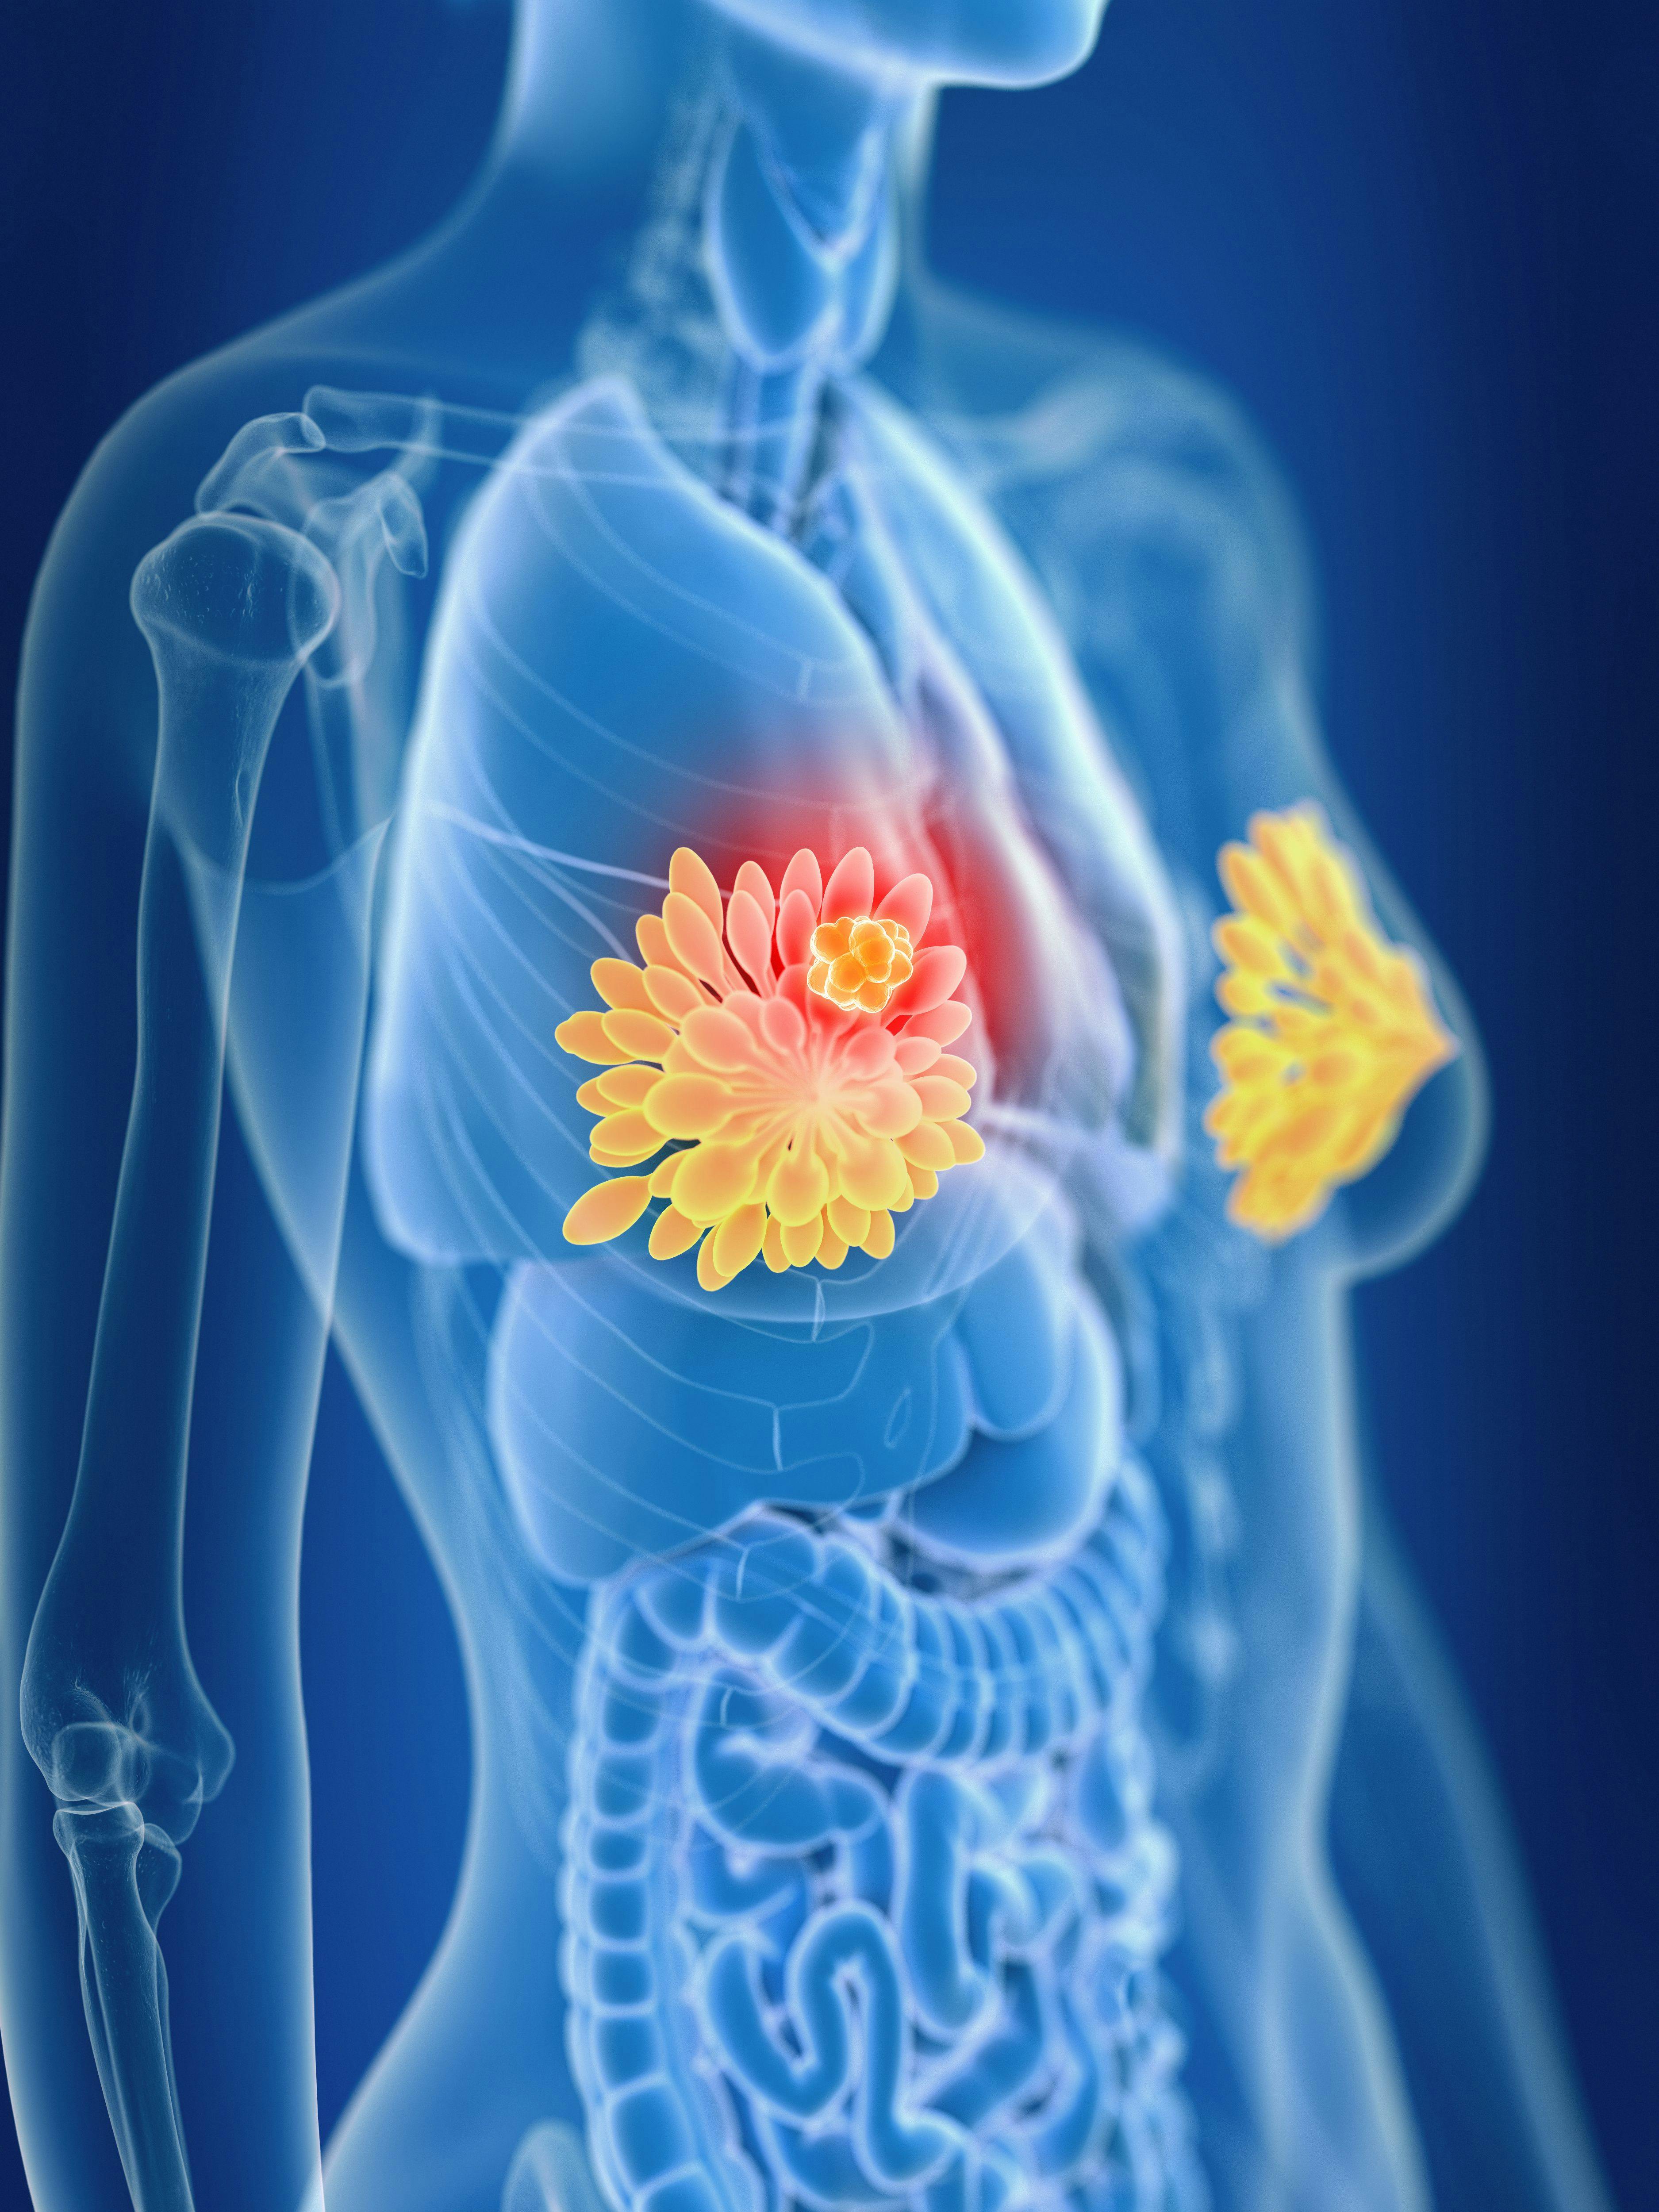 3d rendered medically accurate illustration of a females mammary glands cancer: © SciePro - stock.adobe.com